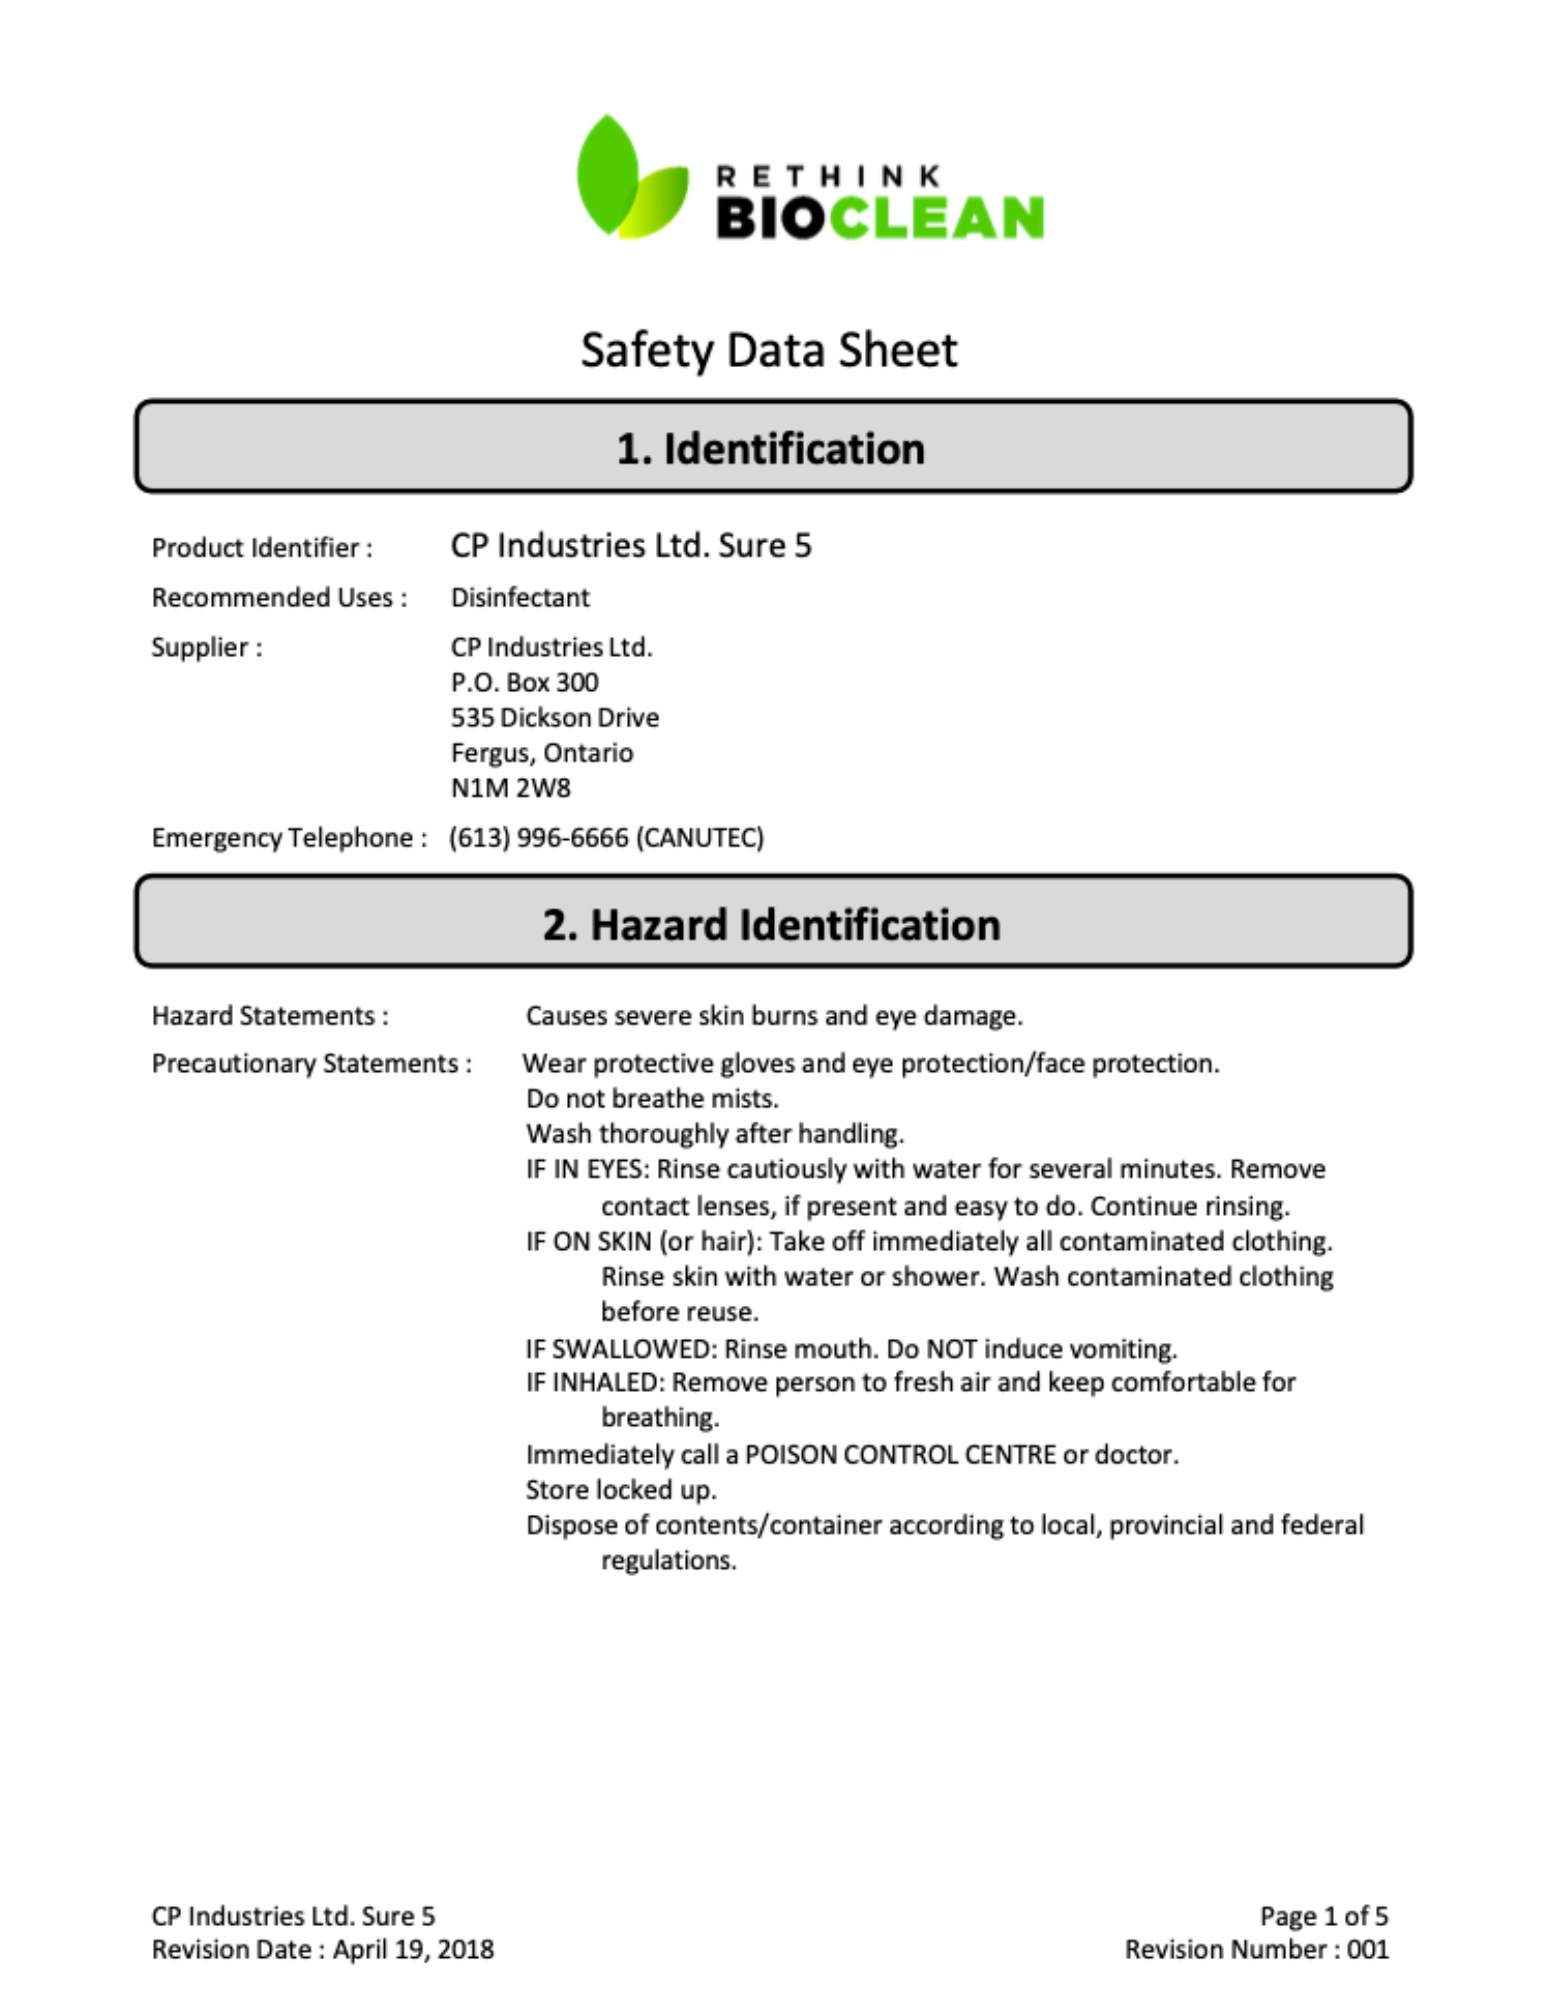 ReThink BioClean's safety data sheet for Sure 5.